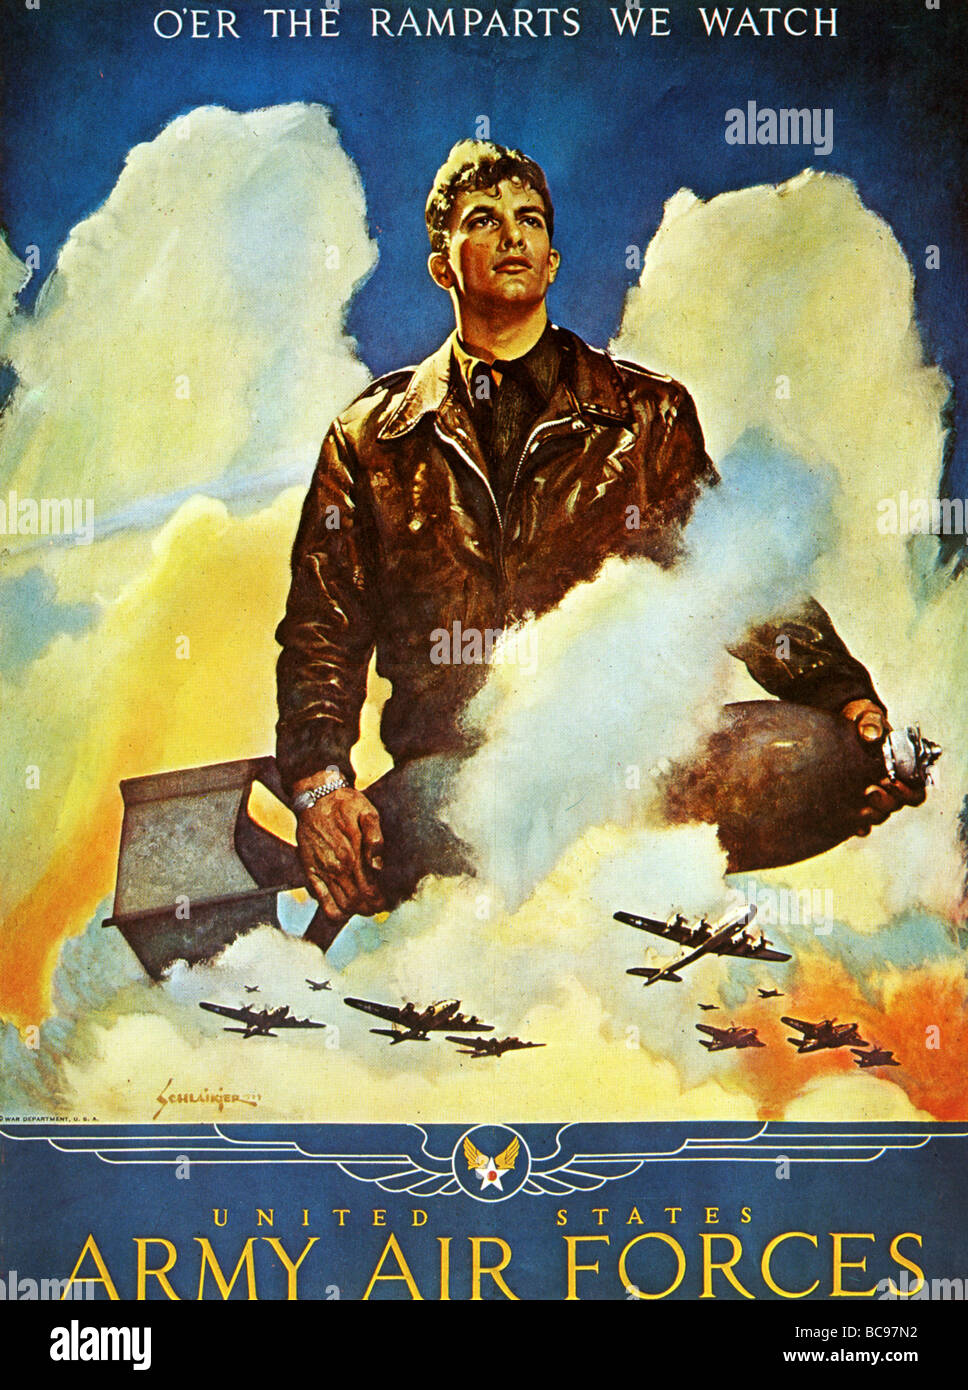 USAAF poster from 1944 .The phrase 'O'r the ramparts we watch' is taken from the Star Spangled Banner anthem Stock Photo